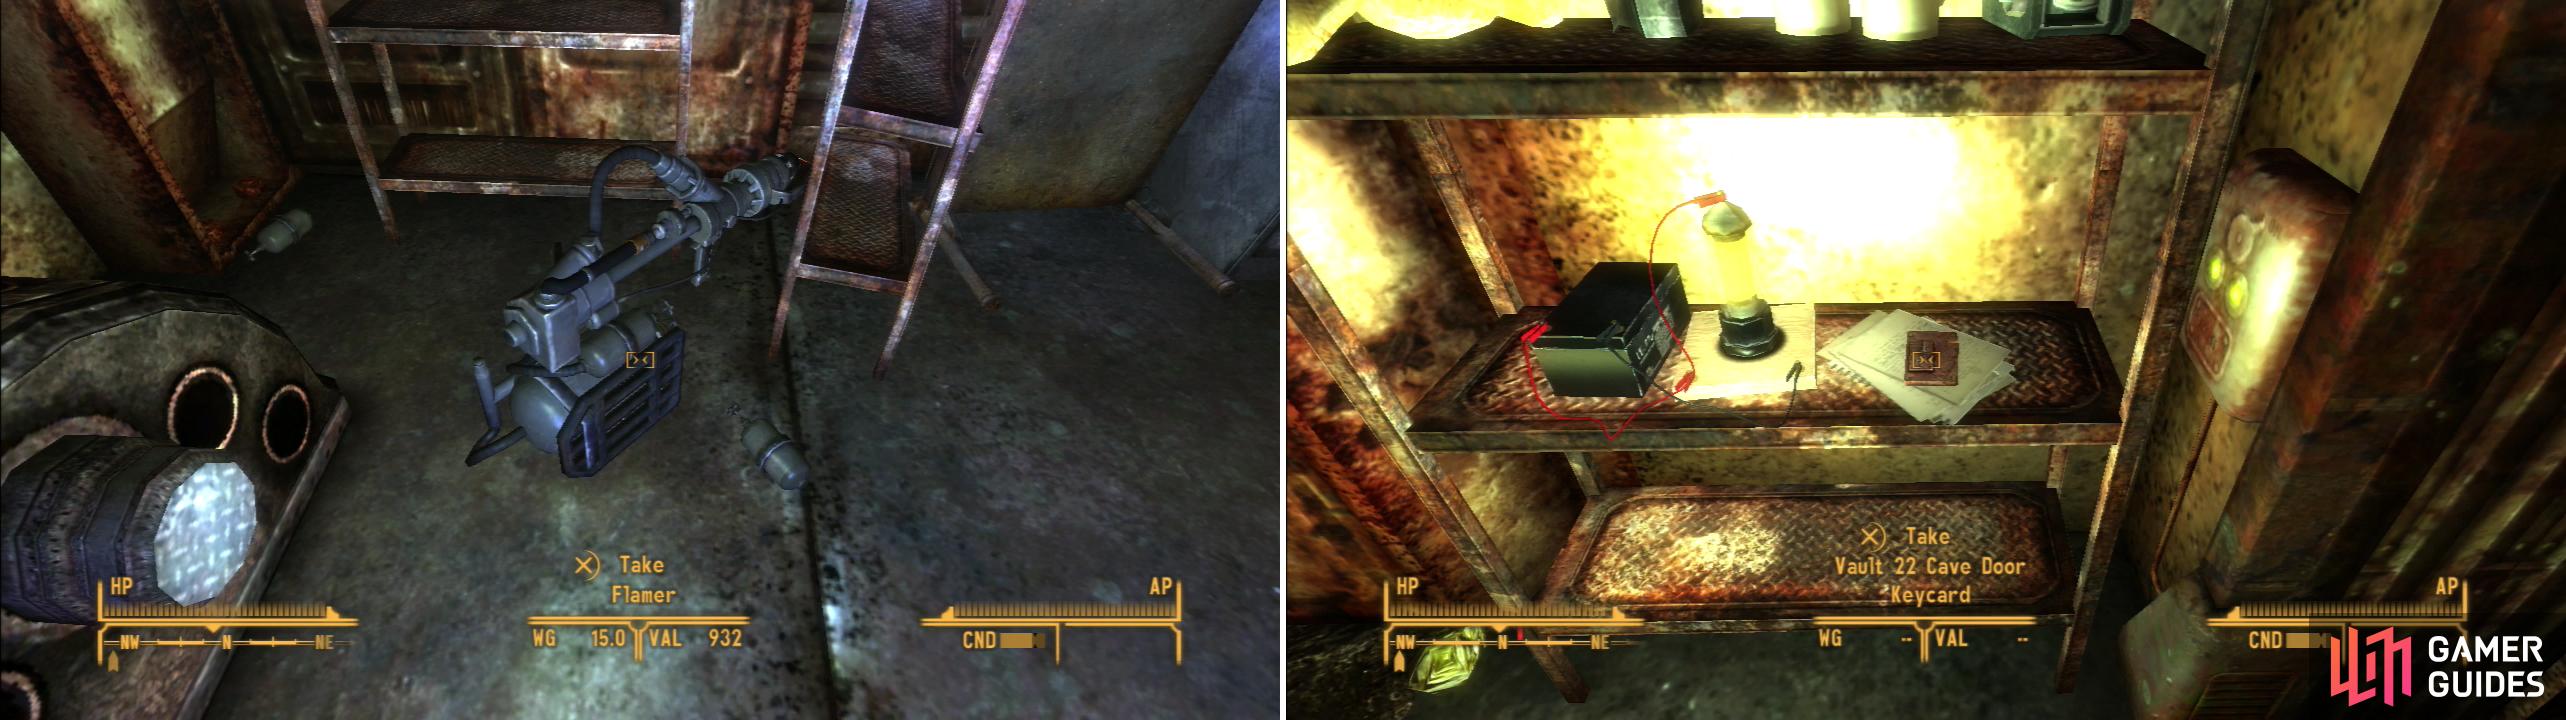 The Flamer you can find may come in handy later… (left). The Vault 22 Cave Door Keycard will open to the door to the caves (right).